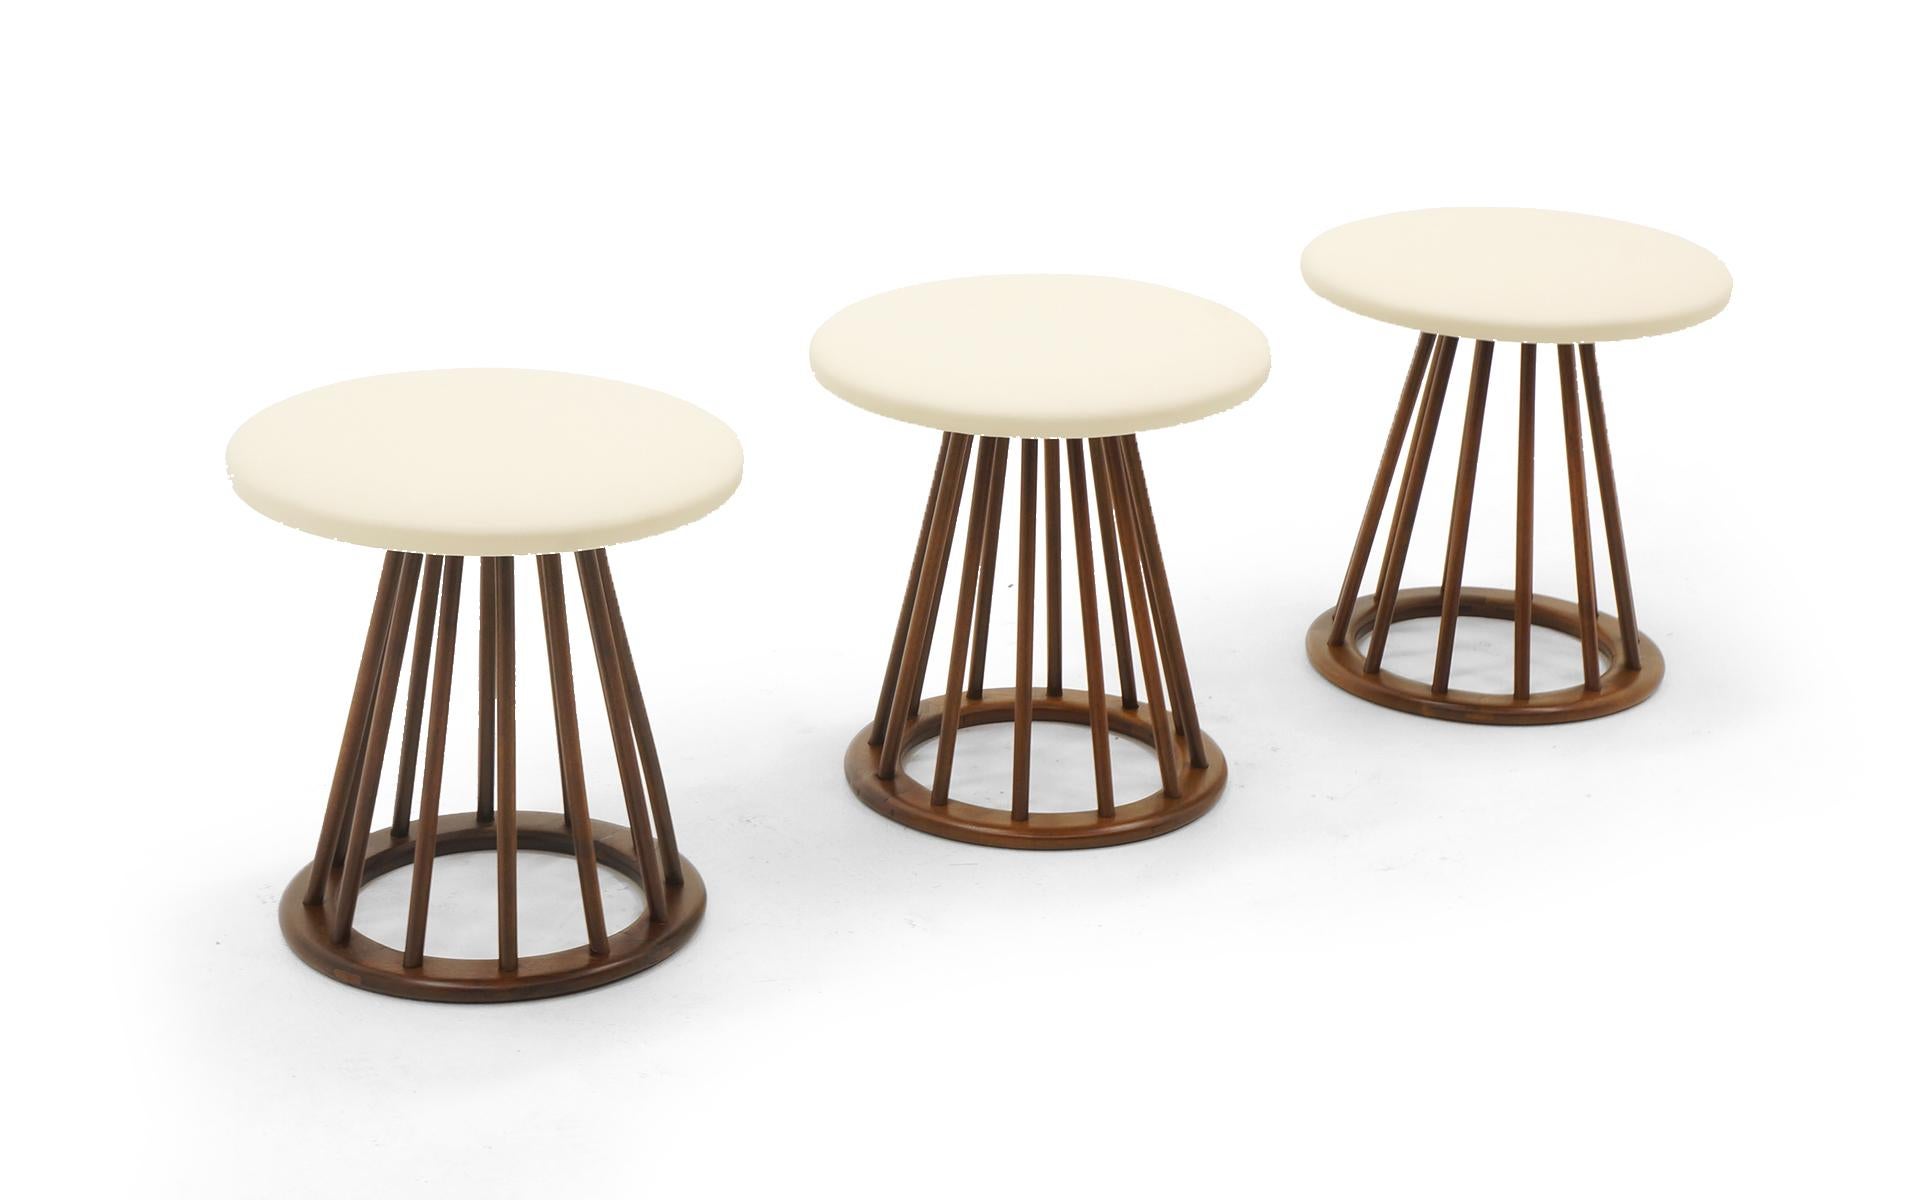 Set of 3 stools designed by Arthur Umanoff, 1950s. Expertly refinished and reupholstered with new off white / ivory leather tops. Together they also make a nice substitute for a bench. Beautiful set.